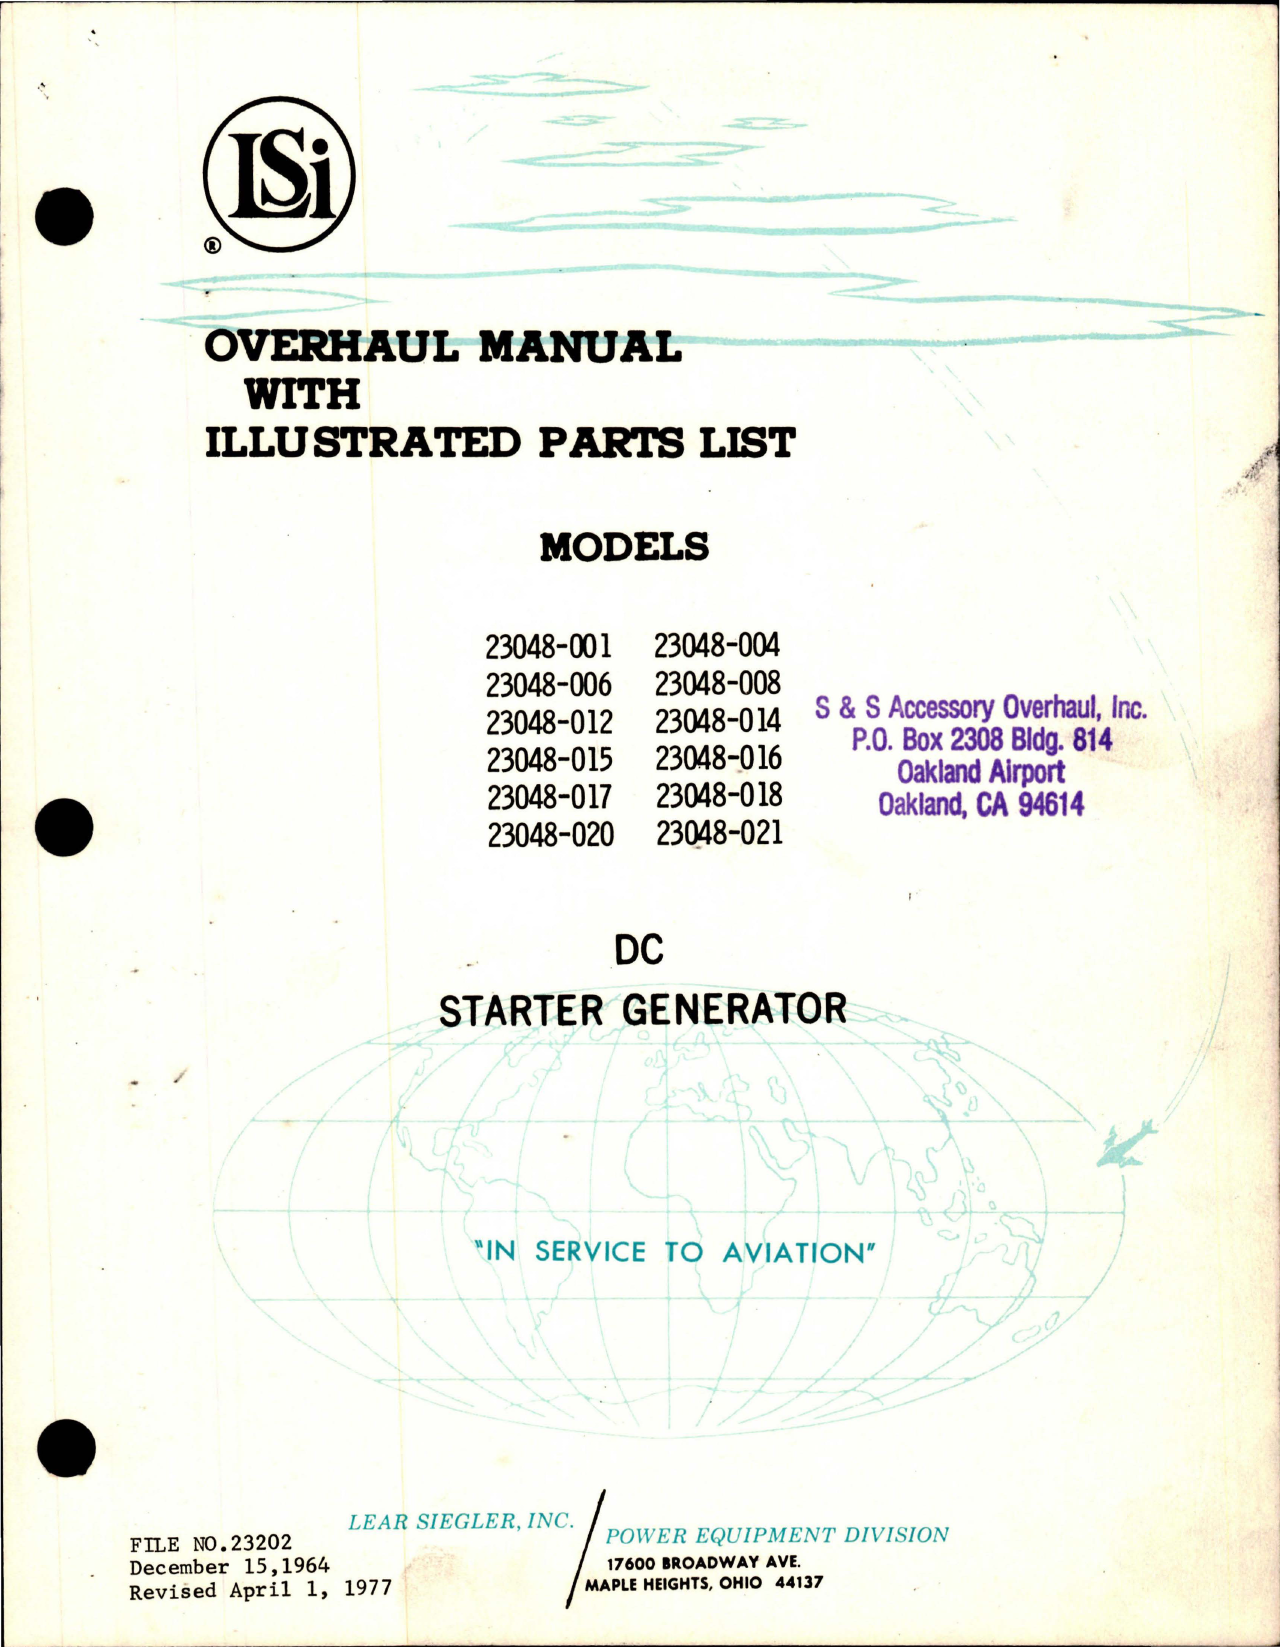 Sample page 5 from AirCorps Library document: Overhaul Manual with Parts List for DC Starter Generator 